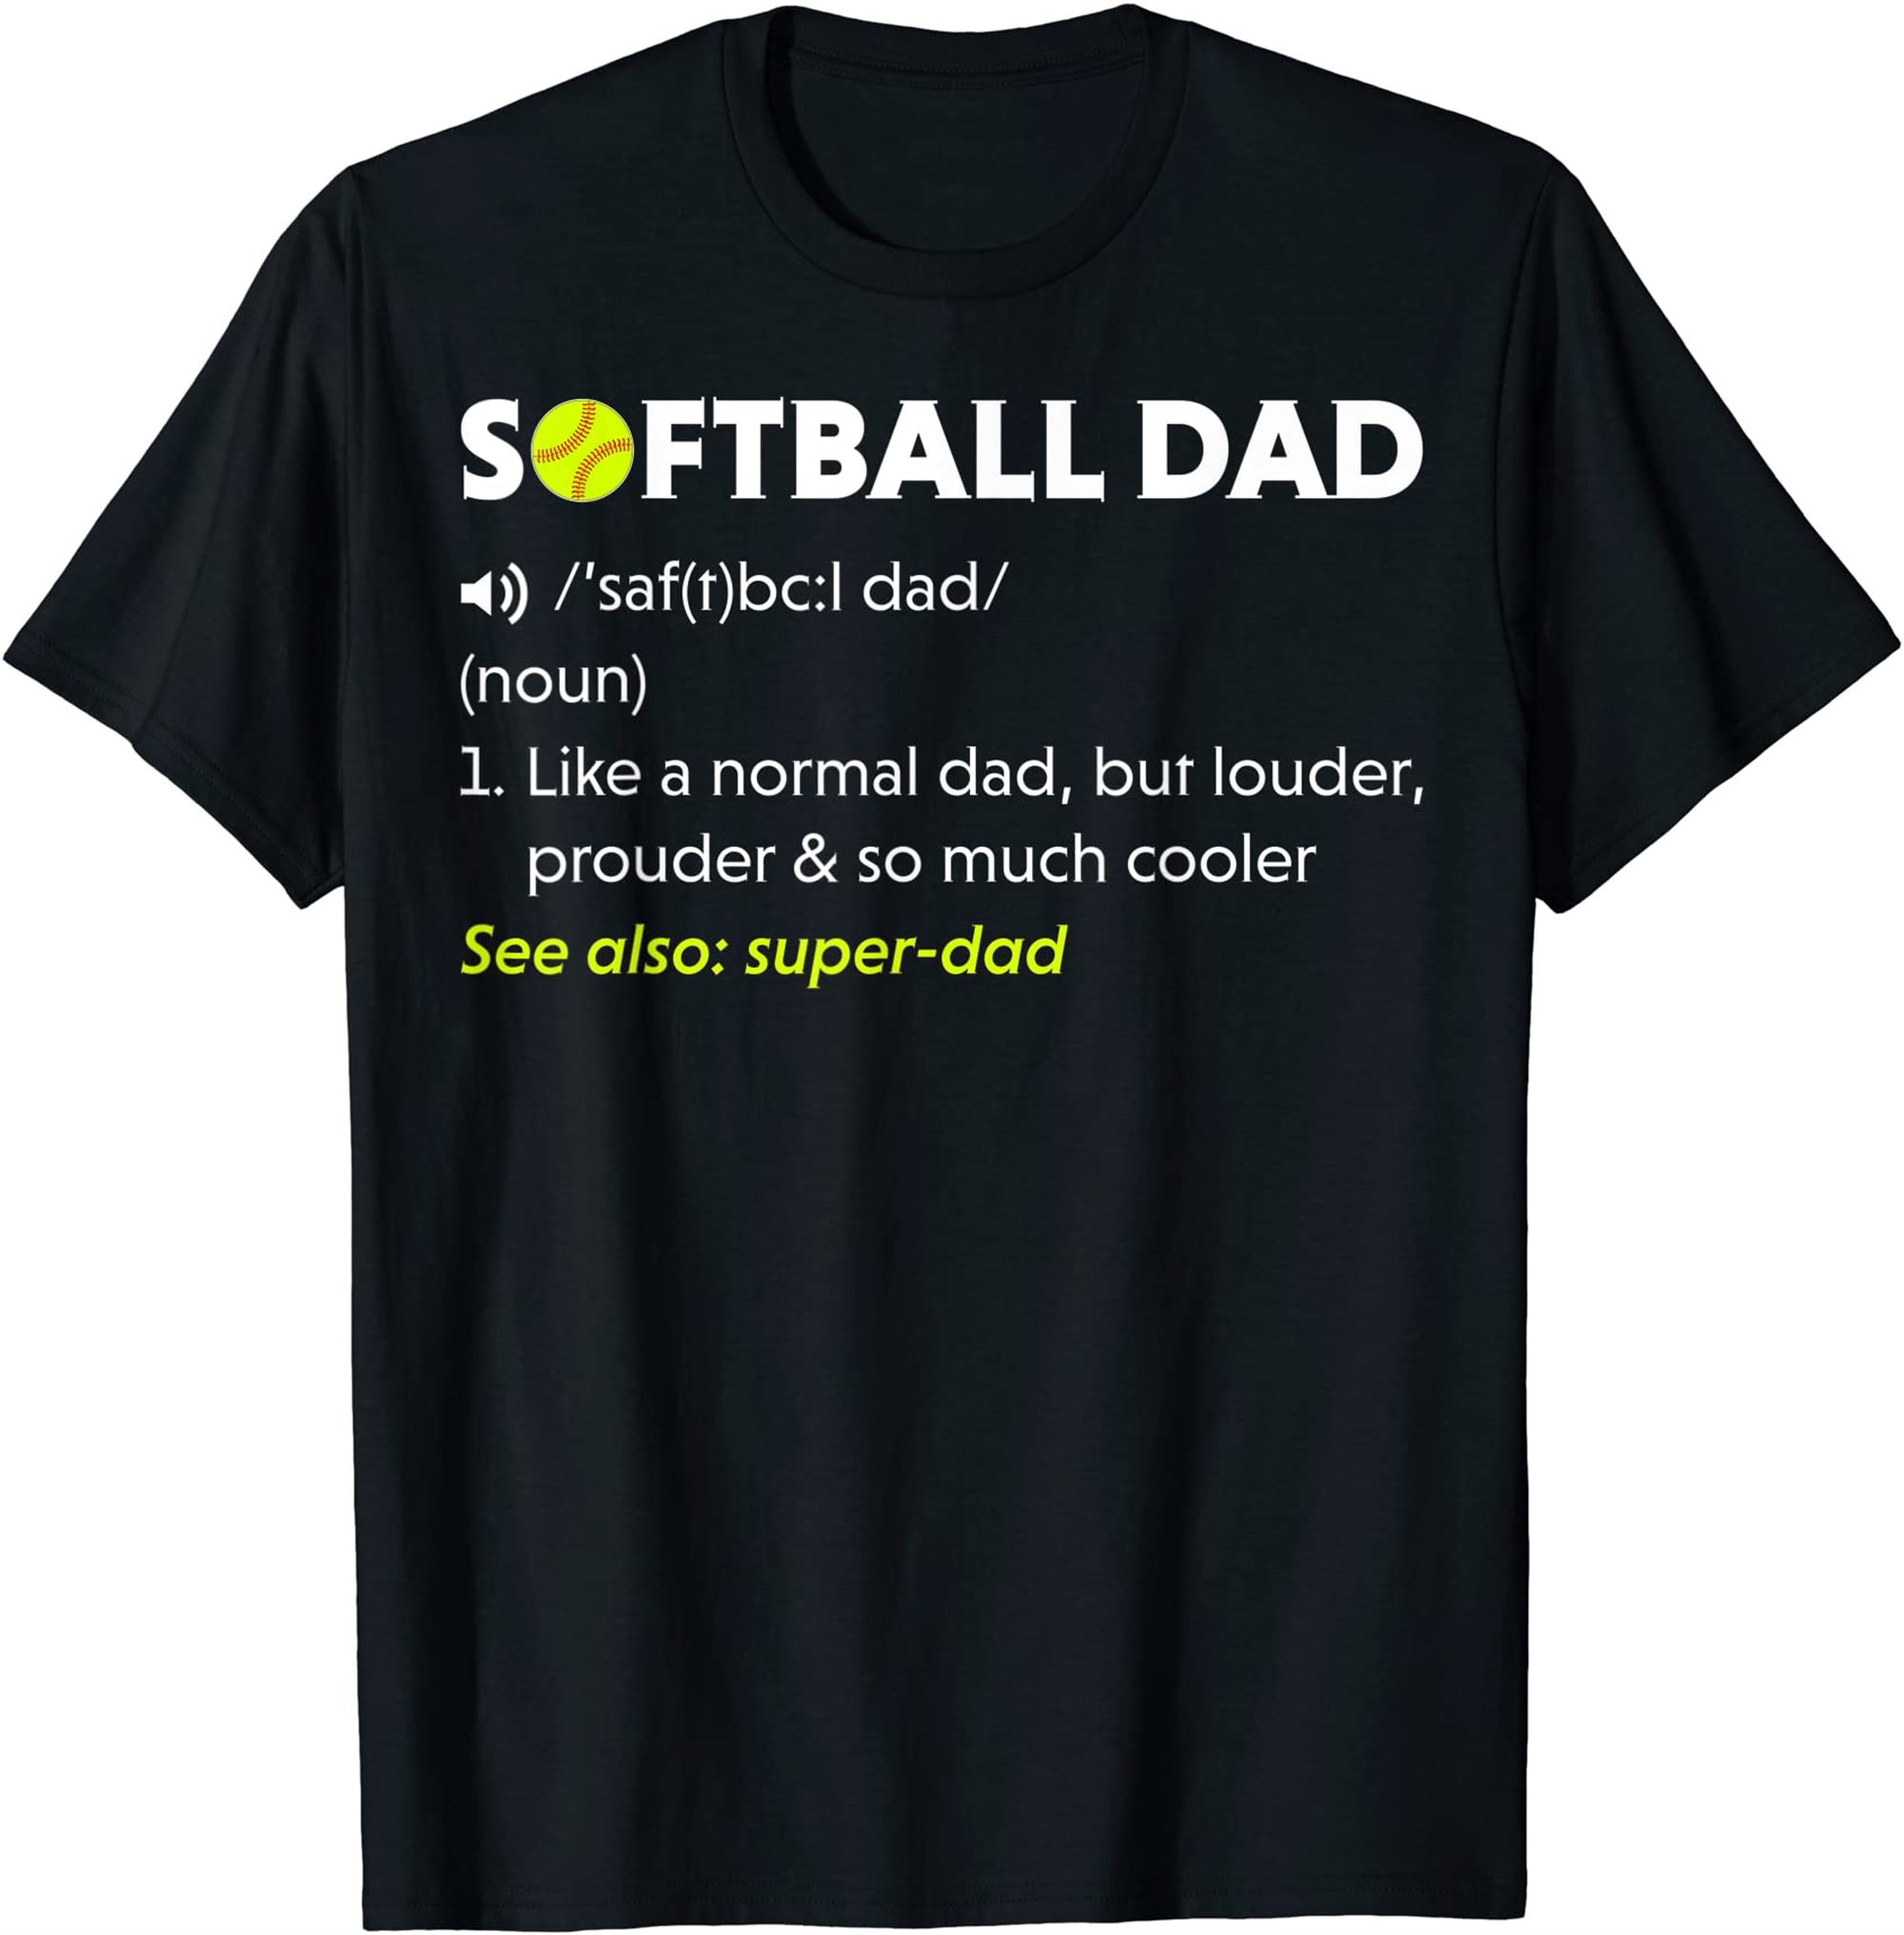 Mens Softball Dad Shirt Fathers Day Gift From Wife Son Daughter T-shirt Full Size Up To 5xl